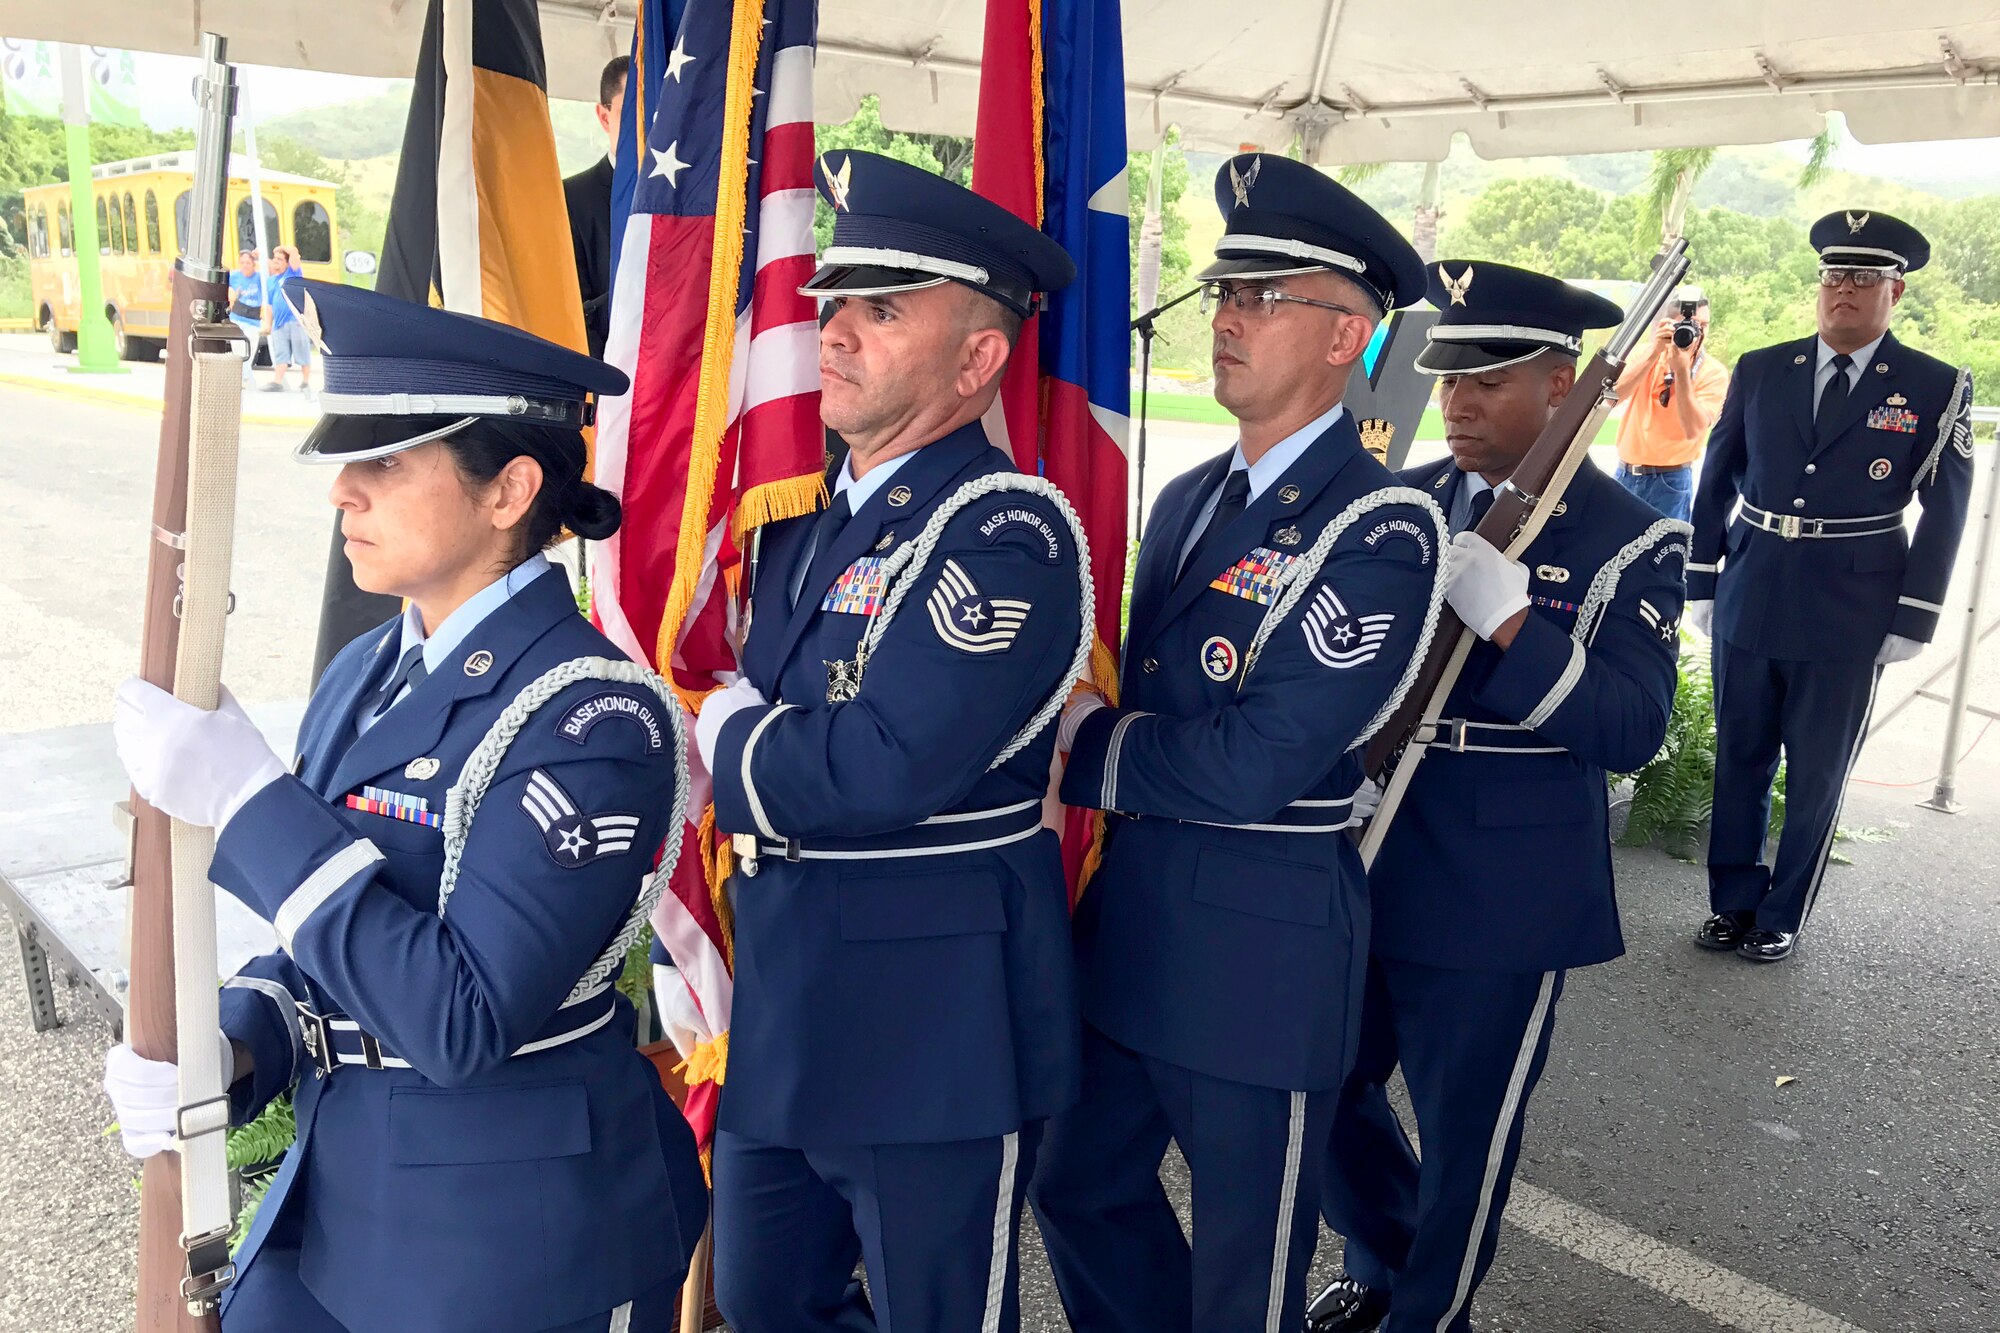 U.S. Airmen of the 156th Airlift Wing honor guard detail render military honors during Brig. Gen. Mihiel Gilormini's posthumous street naming ceremony held in Yauco, Puerto Rico, July 15. (U.S. Air National Guard photo by Staff Sgt. Mizraim Gonzalez/Released)